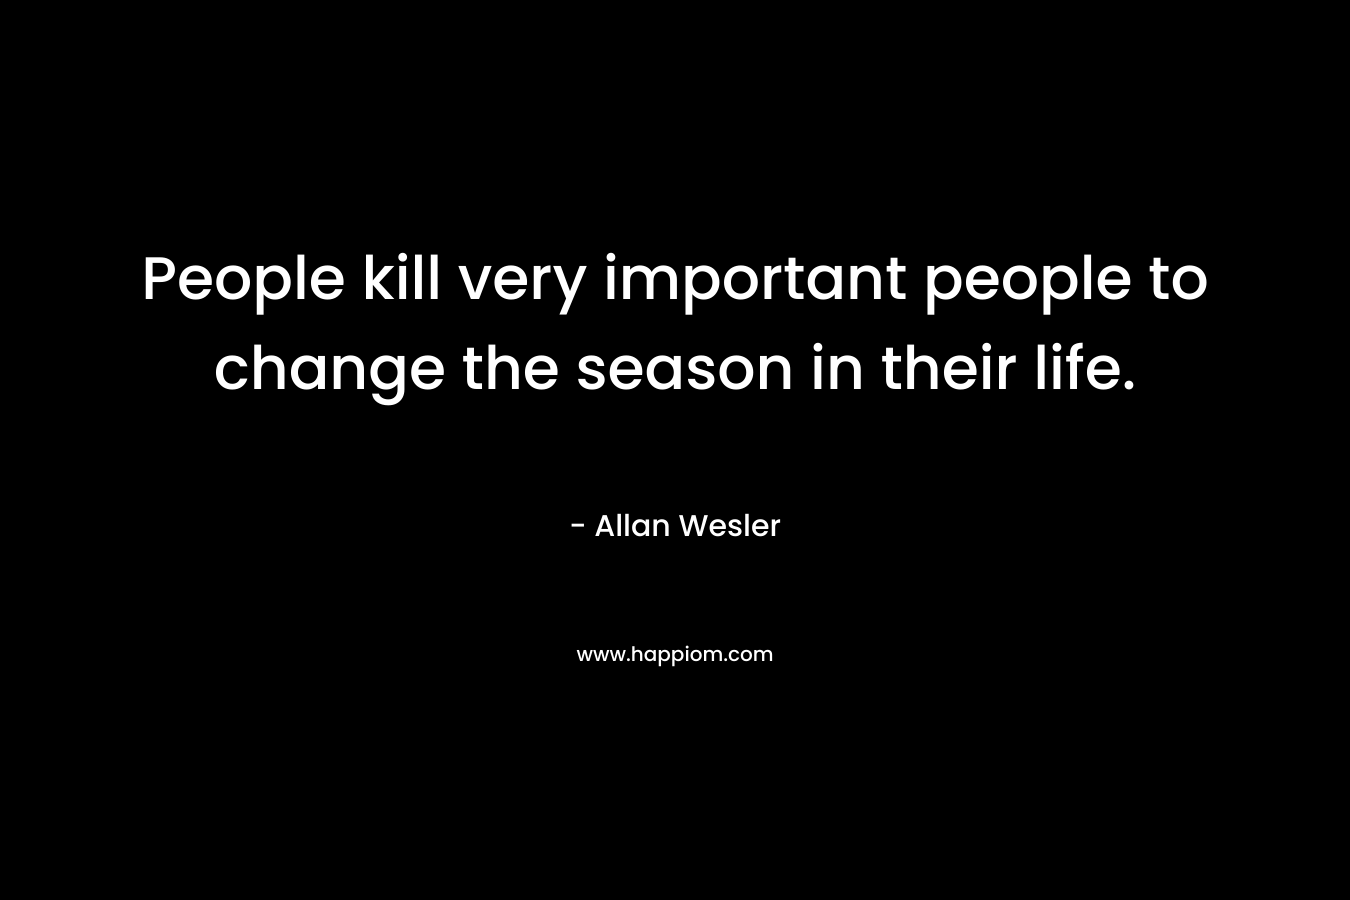 People kill very important people to change the season in their life.